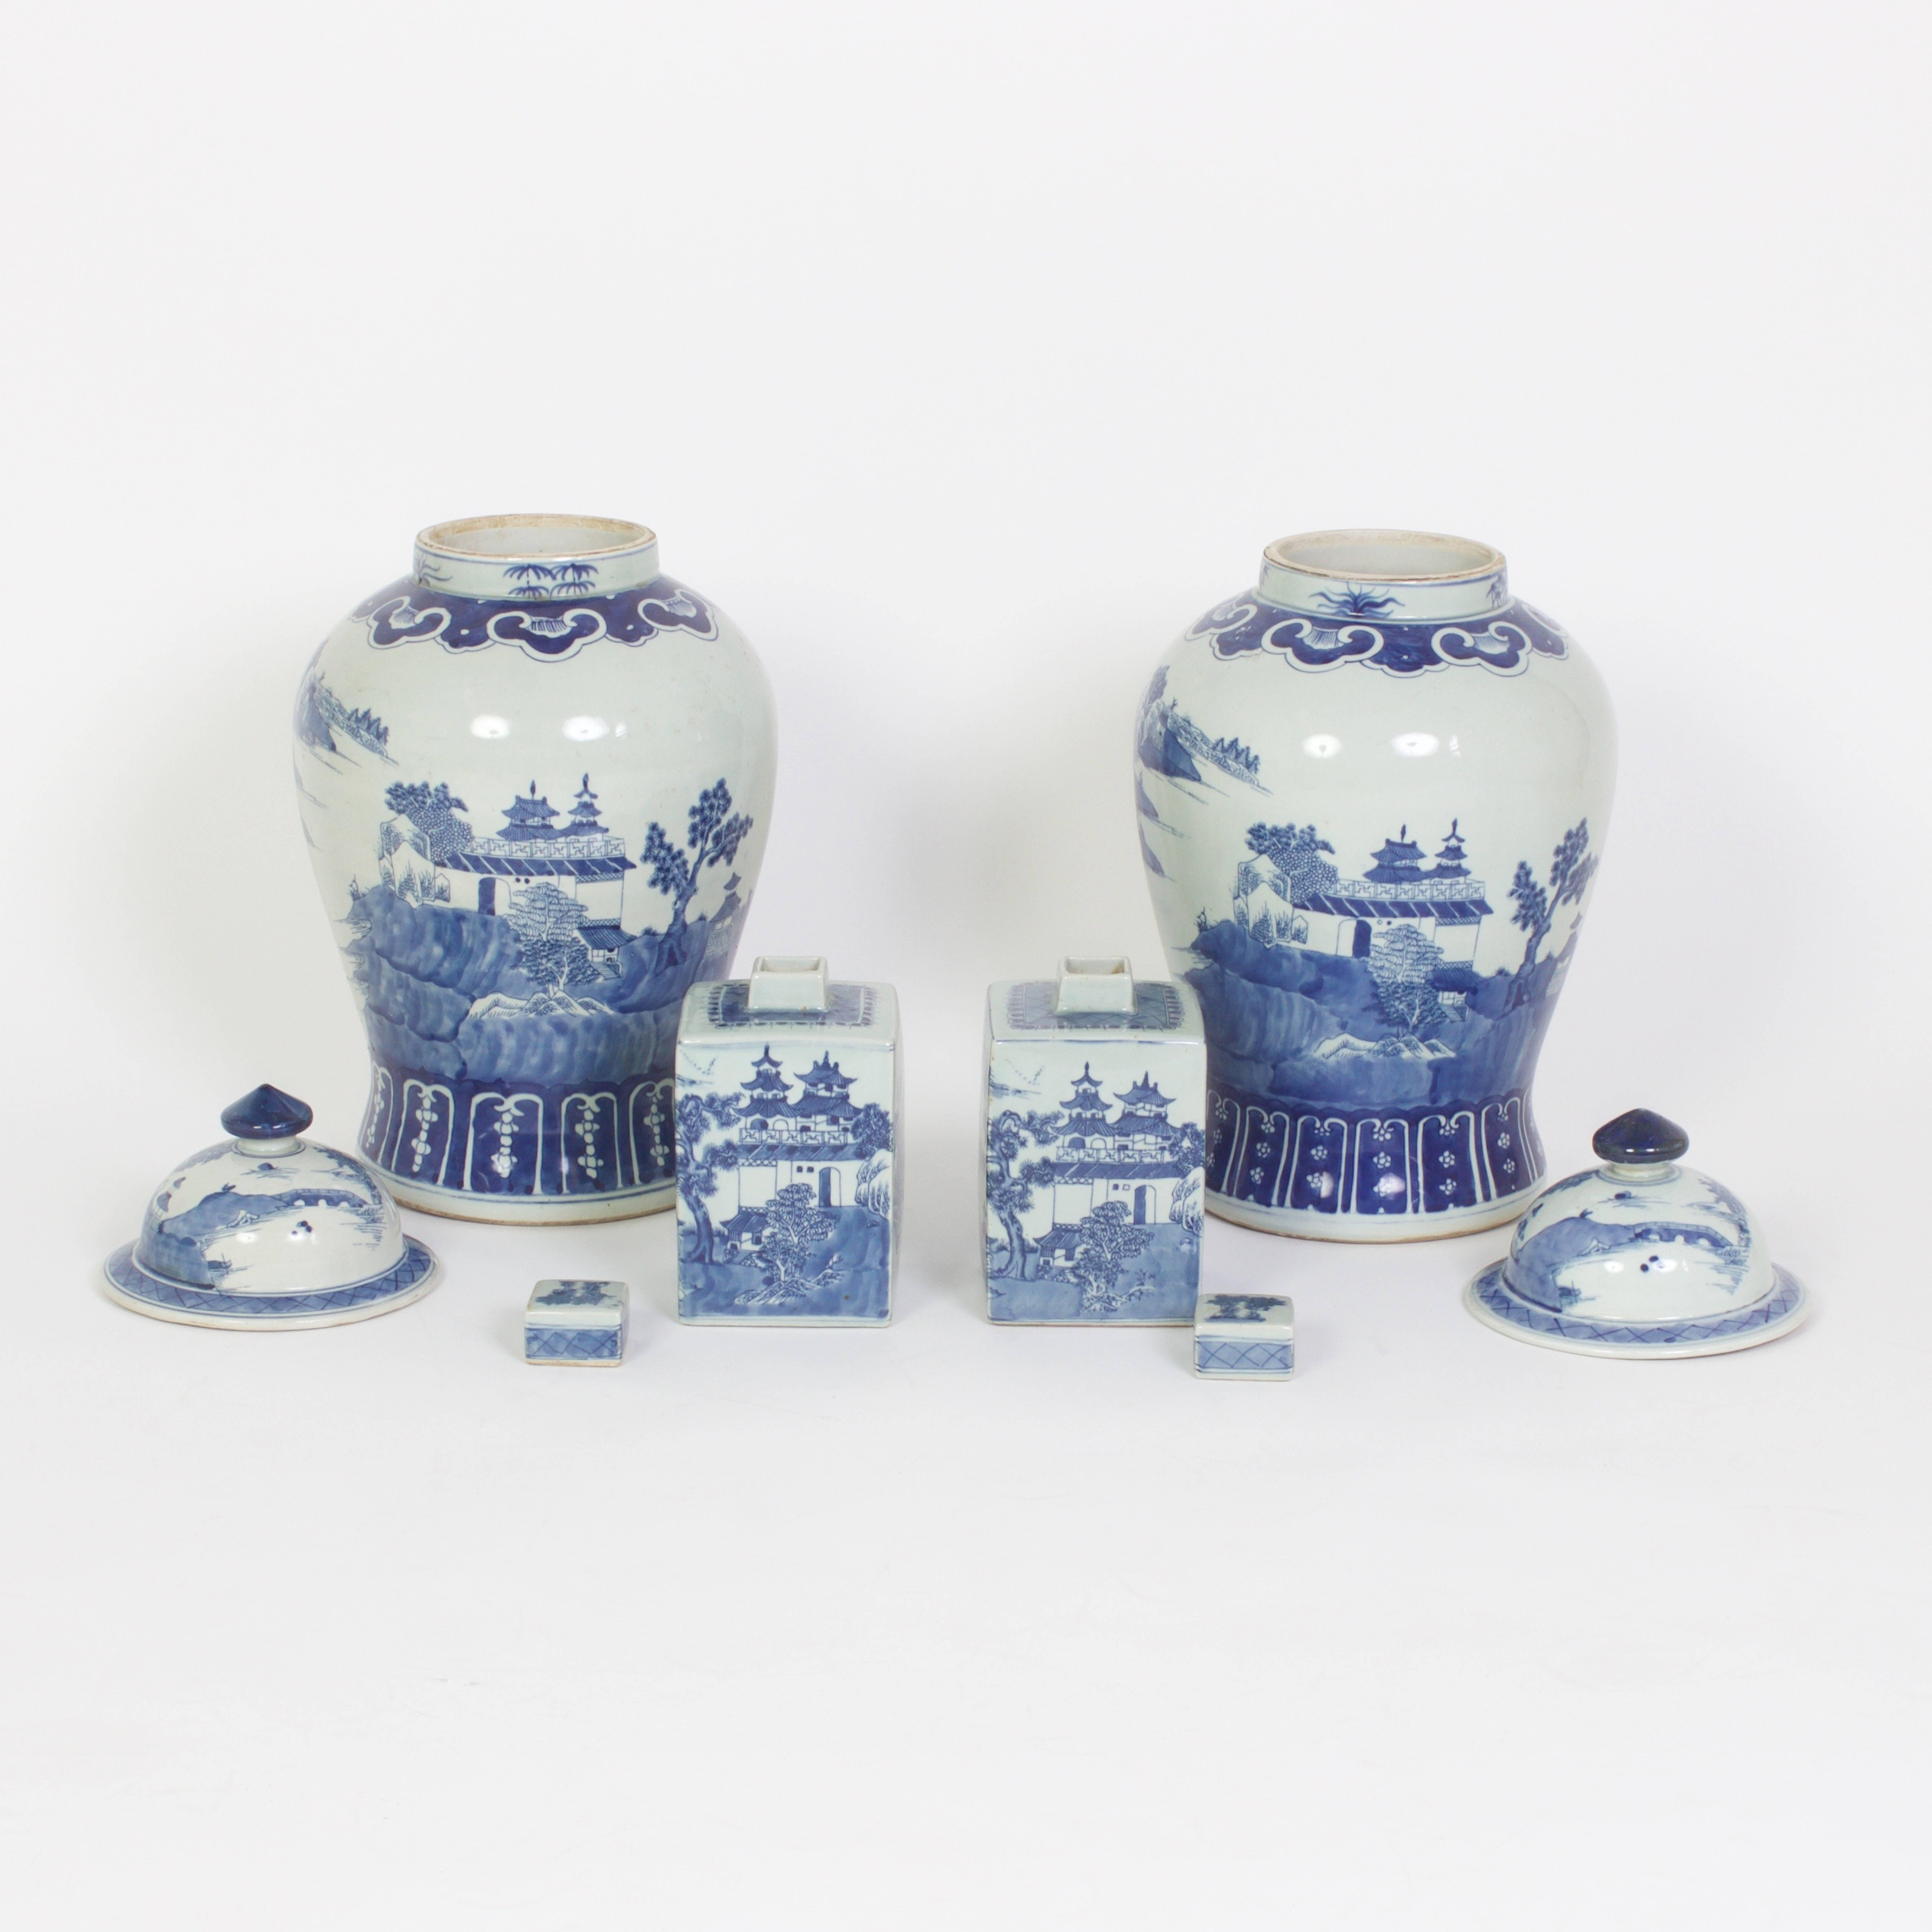 Group of Chinese export style blue and white porcelain including a pair of large jars with Classic form, decorated with pagodas and landscapes. A smaller pair of unusual tea canisters, also decorated with pagodas and landscapes. Priced per